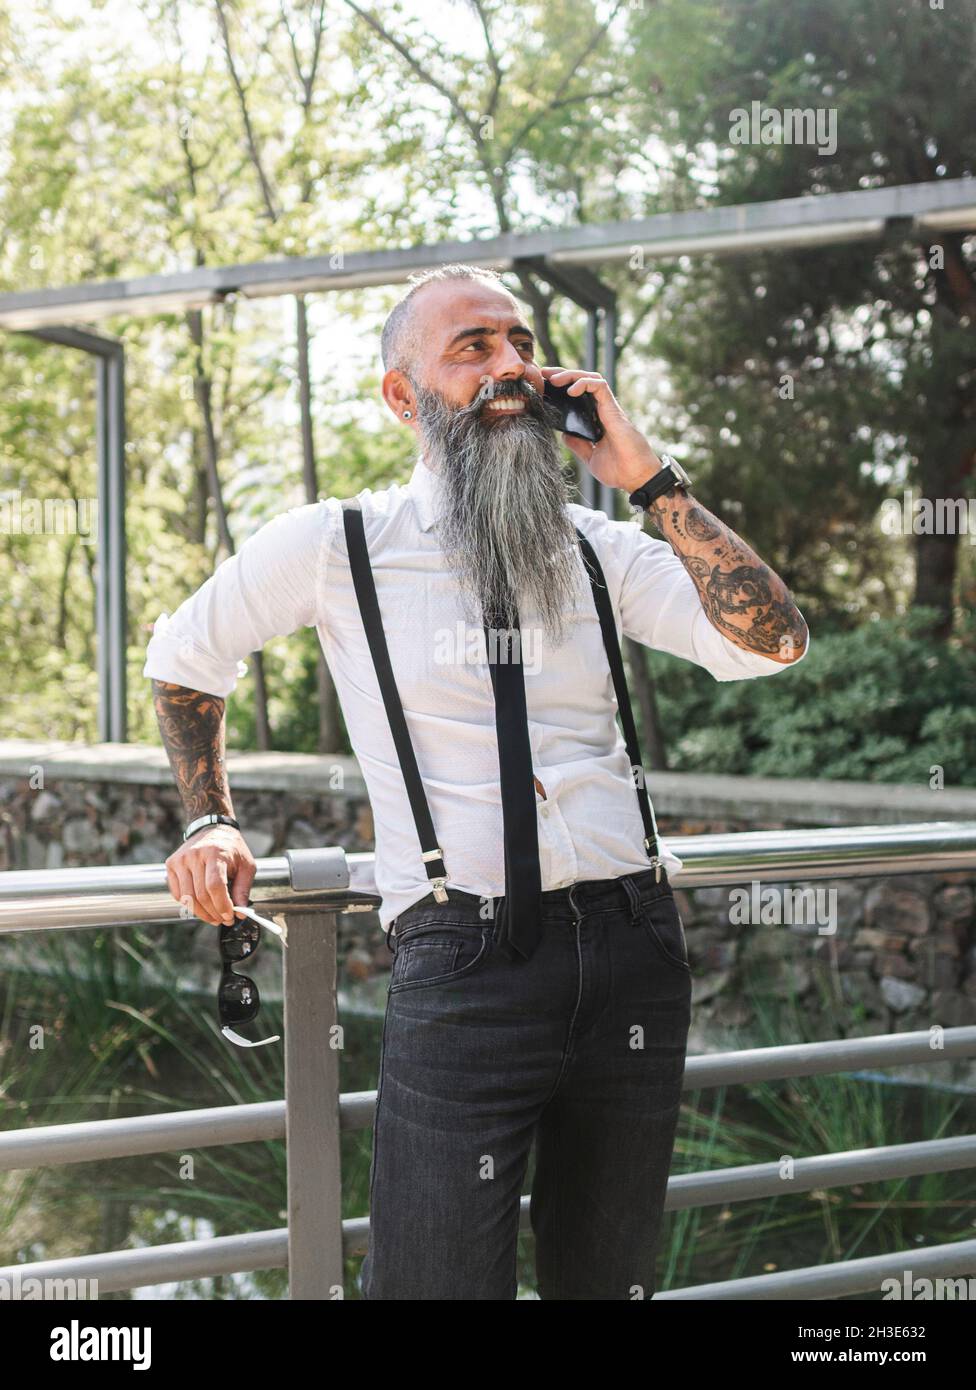 Confident smiling bearded hipster in stylish outfit speaking on cellphone while standing near metal fence on sunny street Stock Photo